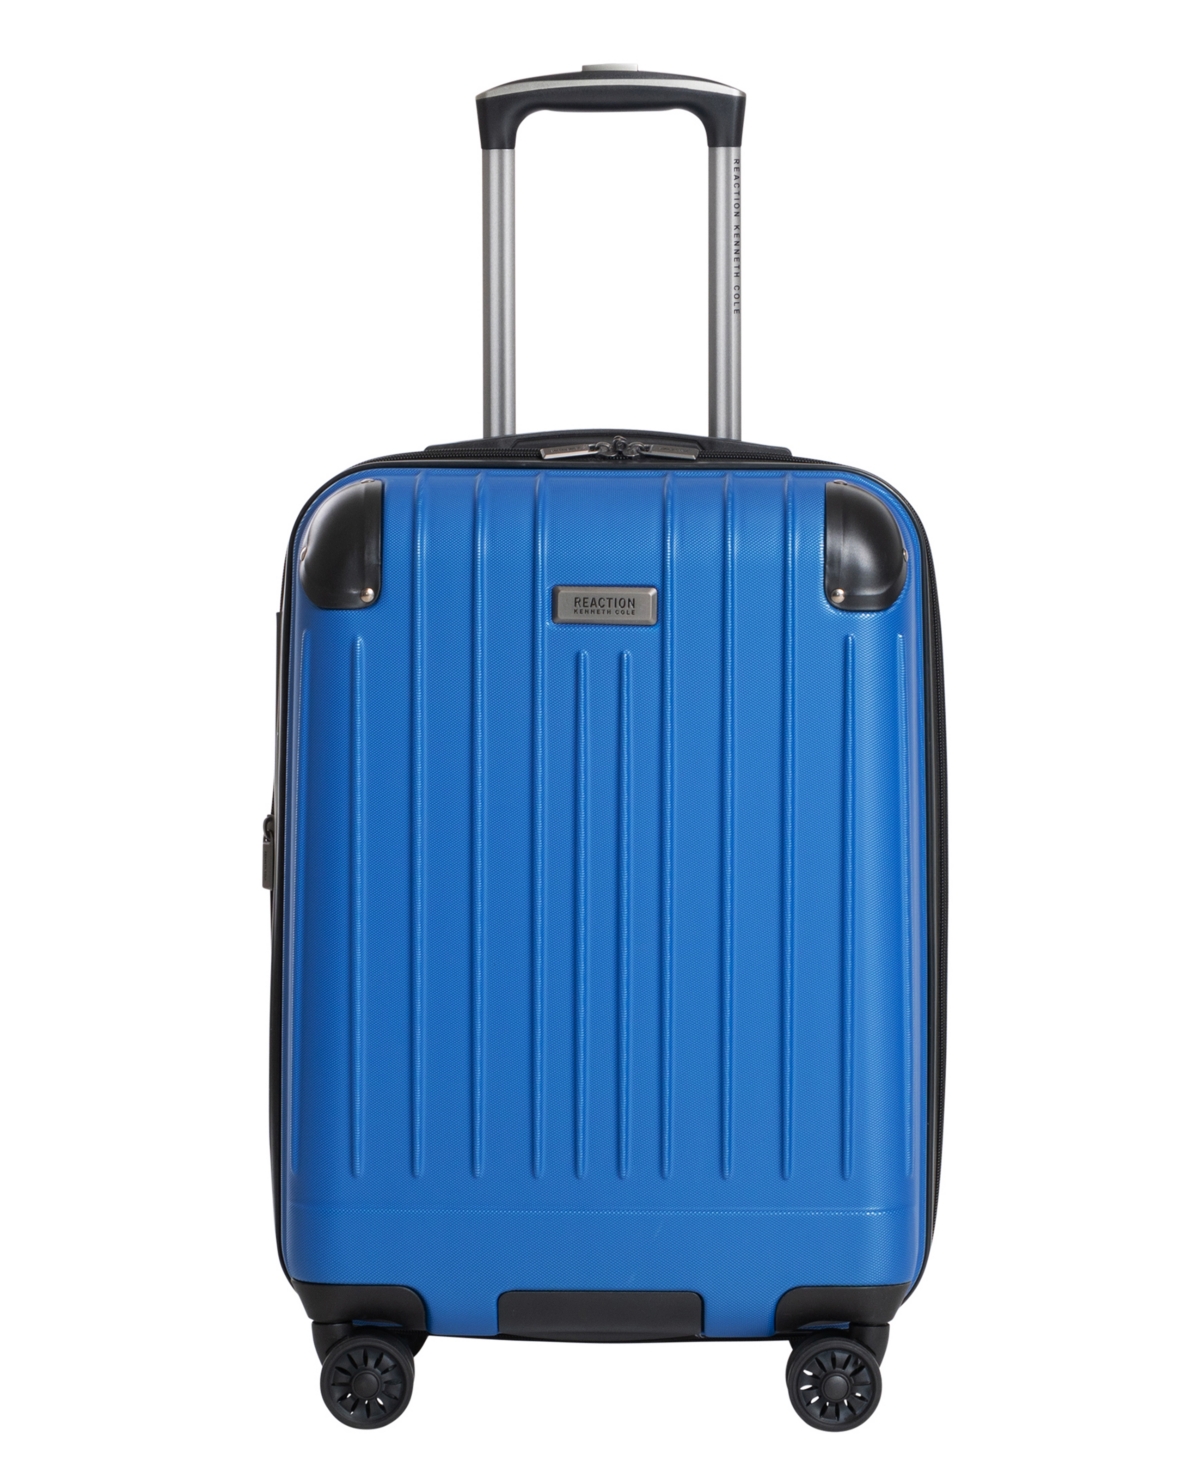 Flying Axis 20" Hardside Expandable Carry-on - Classic Blue